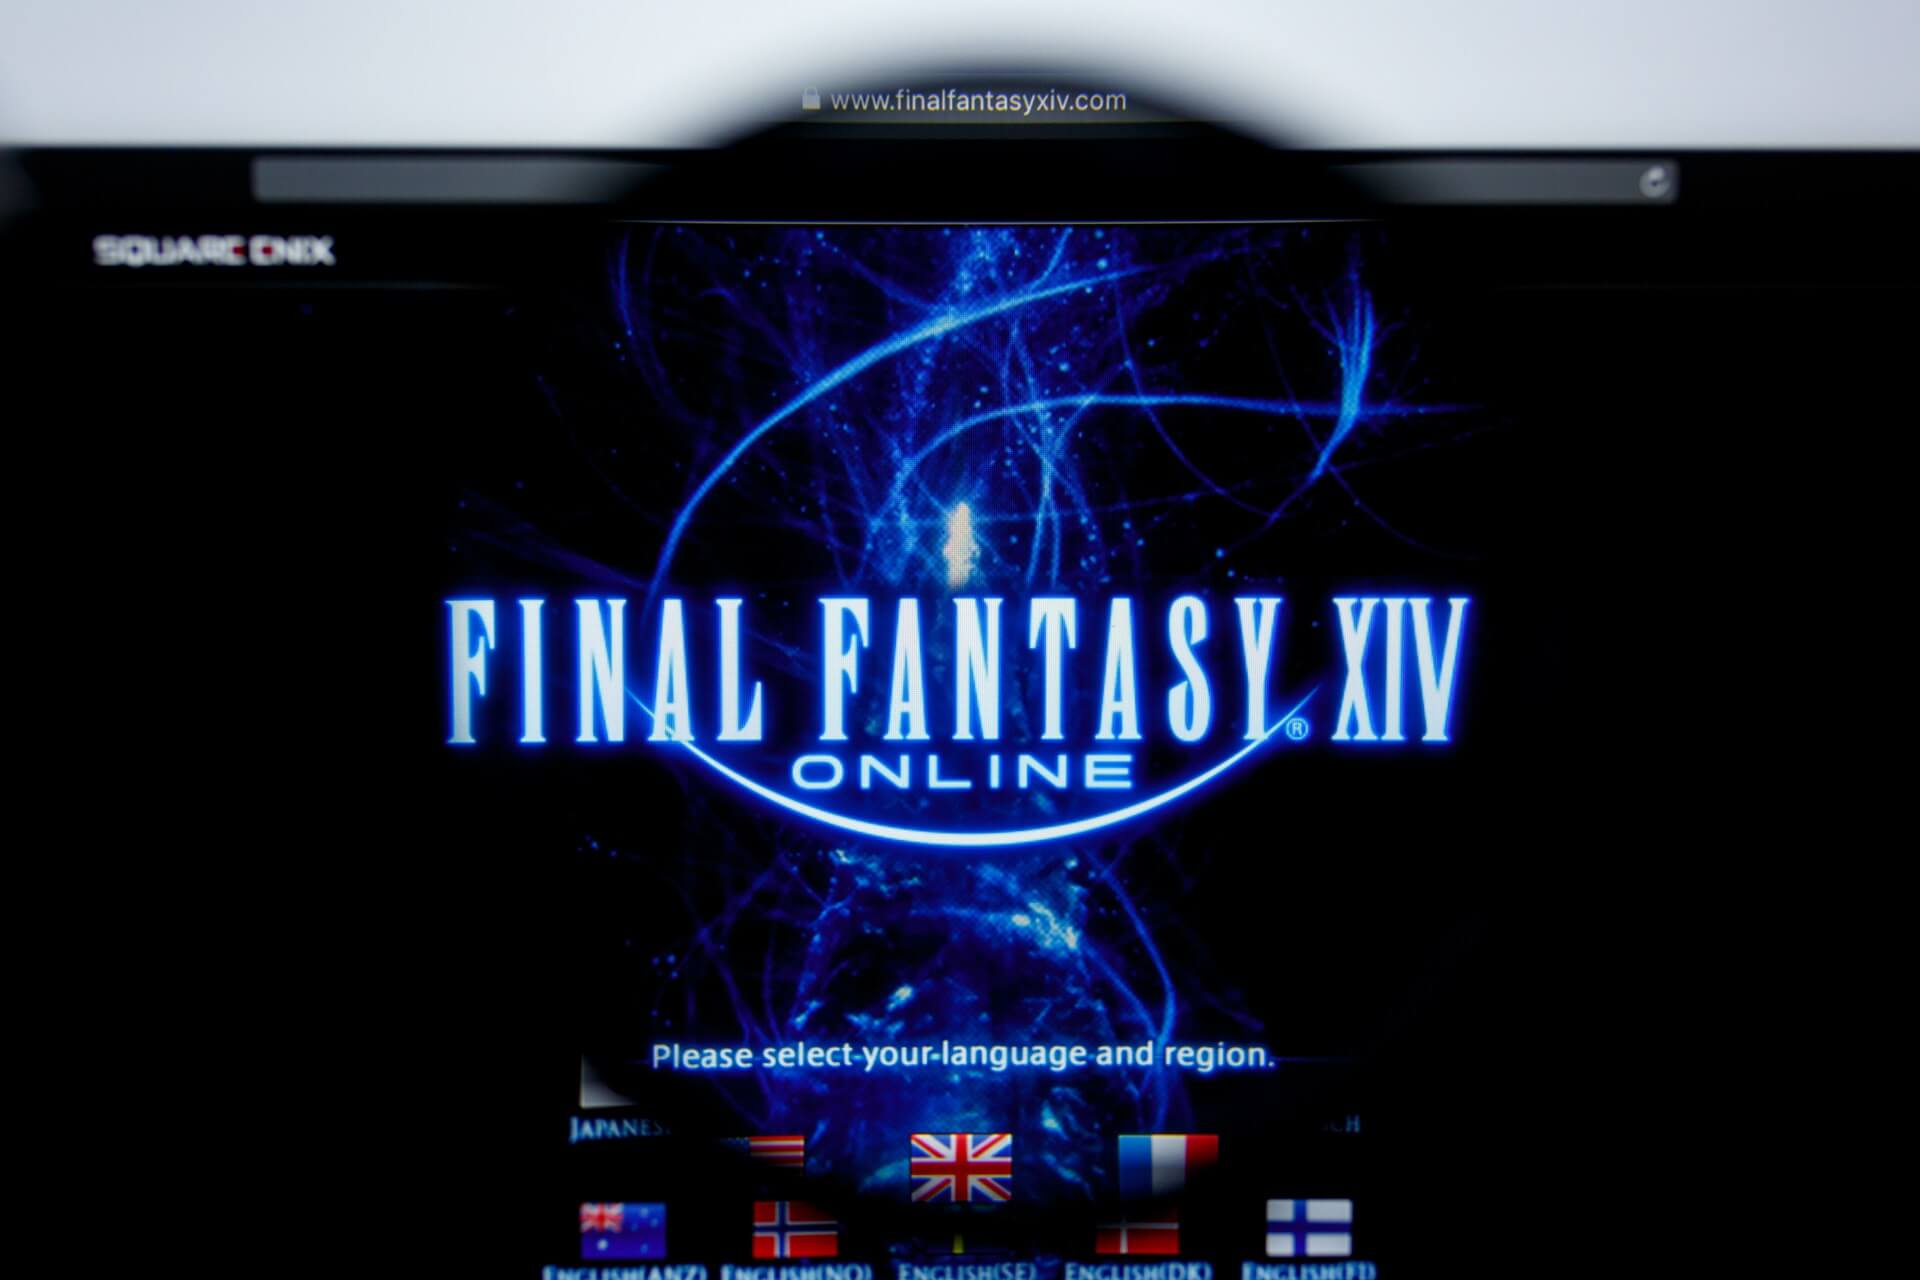 is there a mac client for final fantasy 14